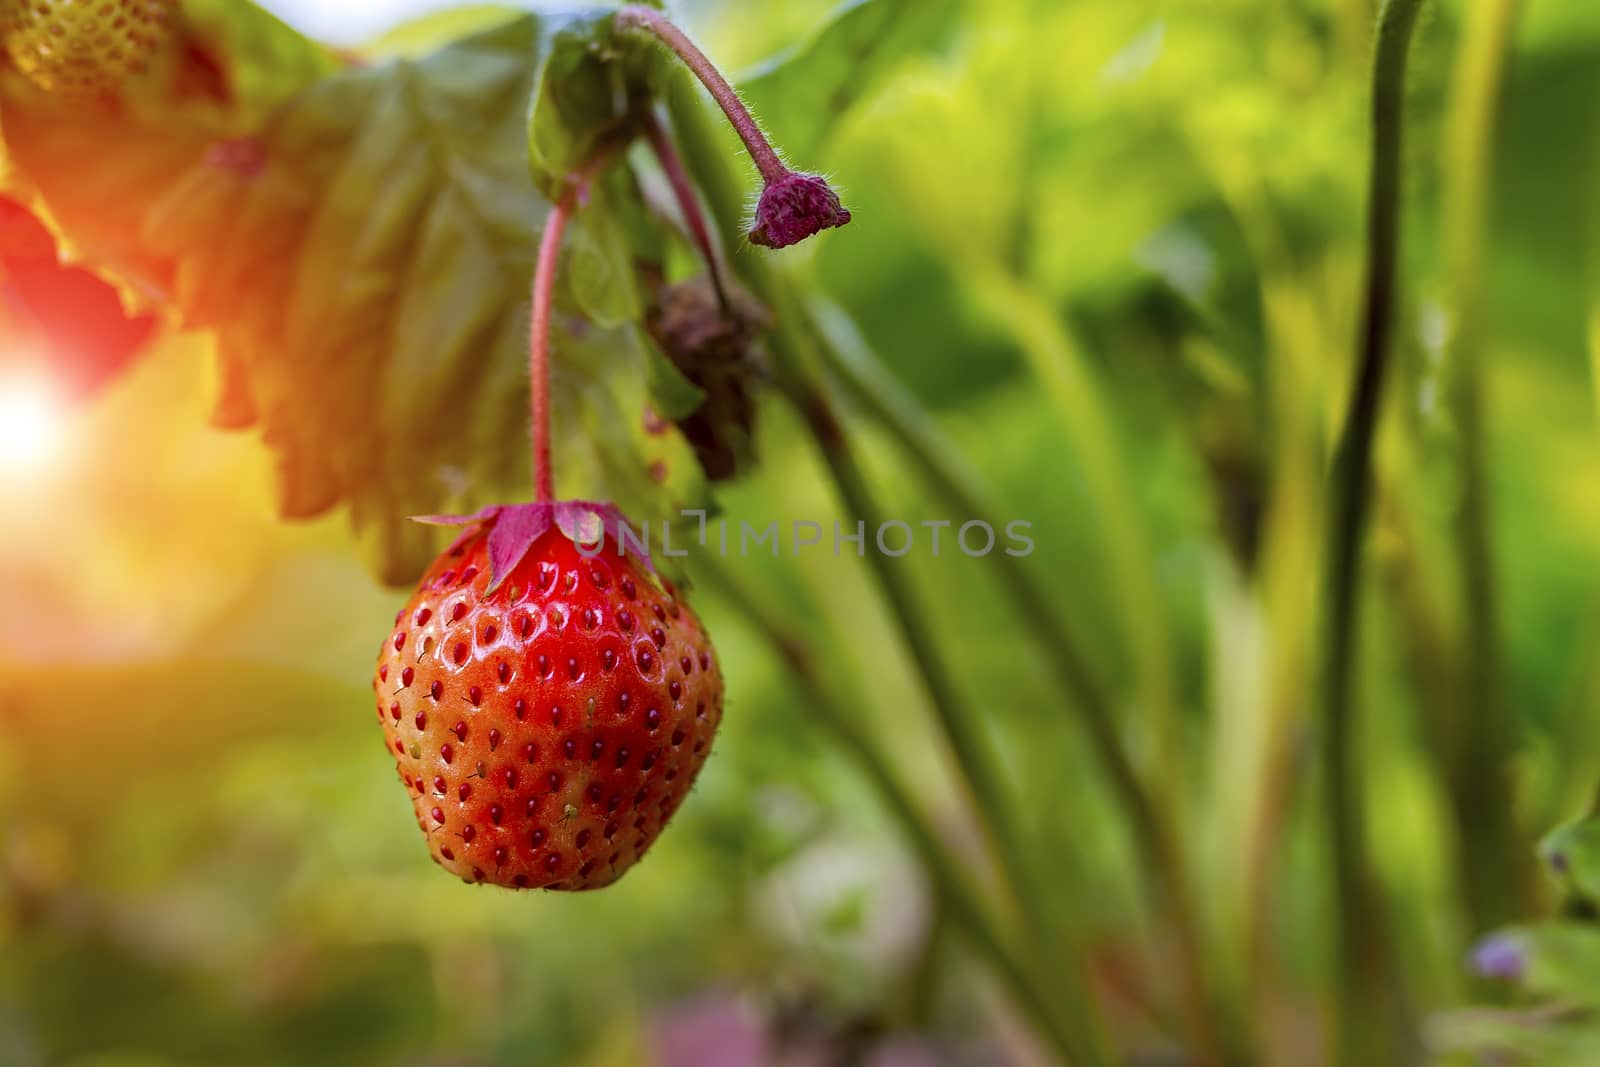 Strawberries grow and ripen in the garden bed against a background of green leaves in the ridge. The sun breaks through the foliage.